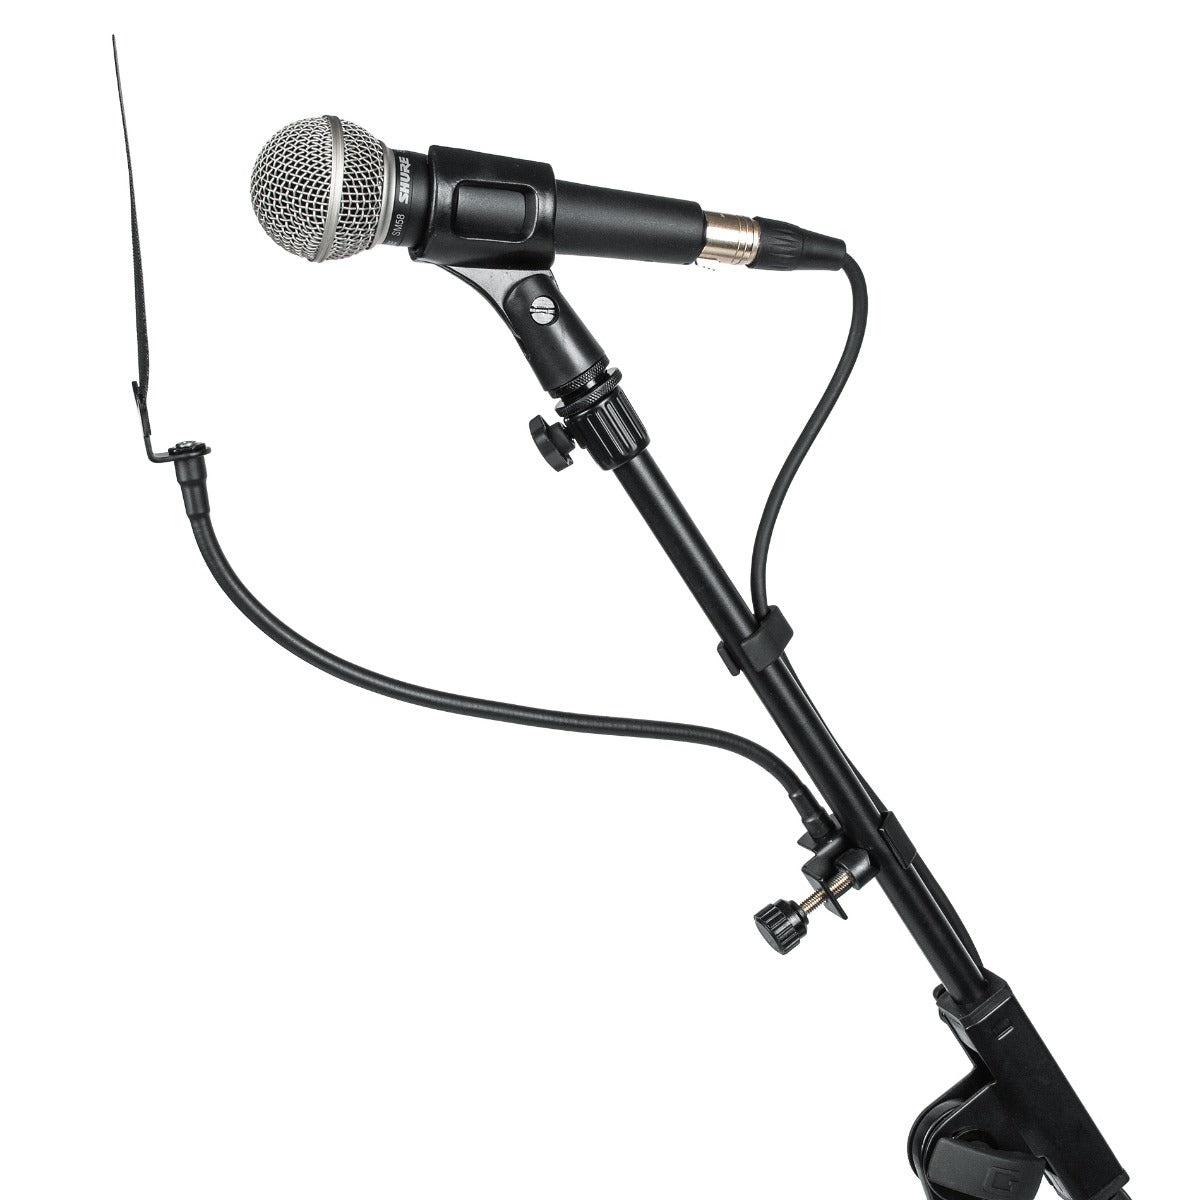 Filter attached to a microphone stand from a side profile